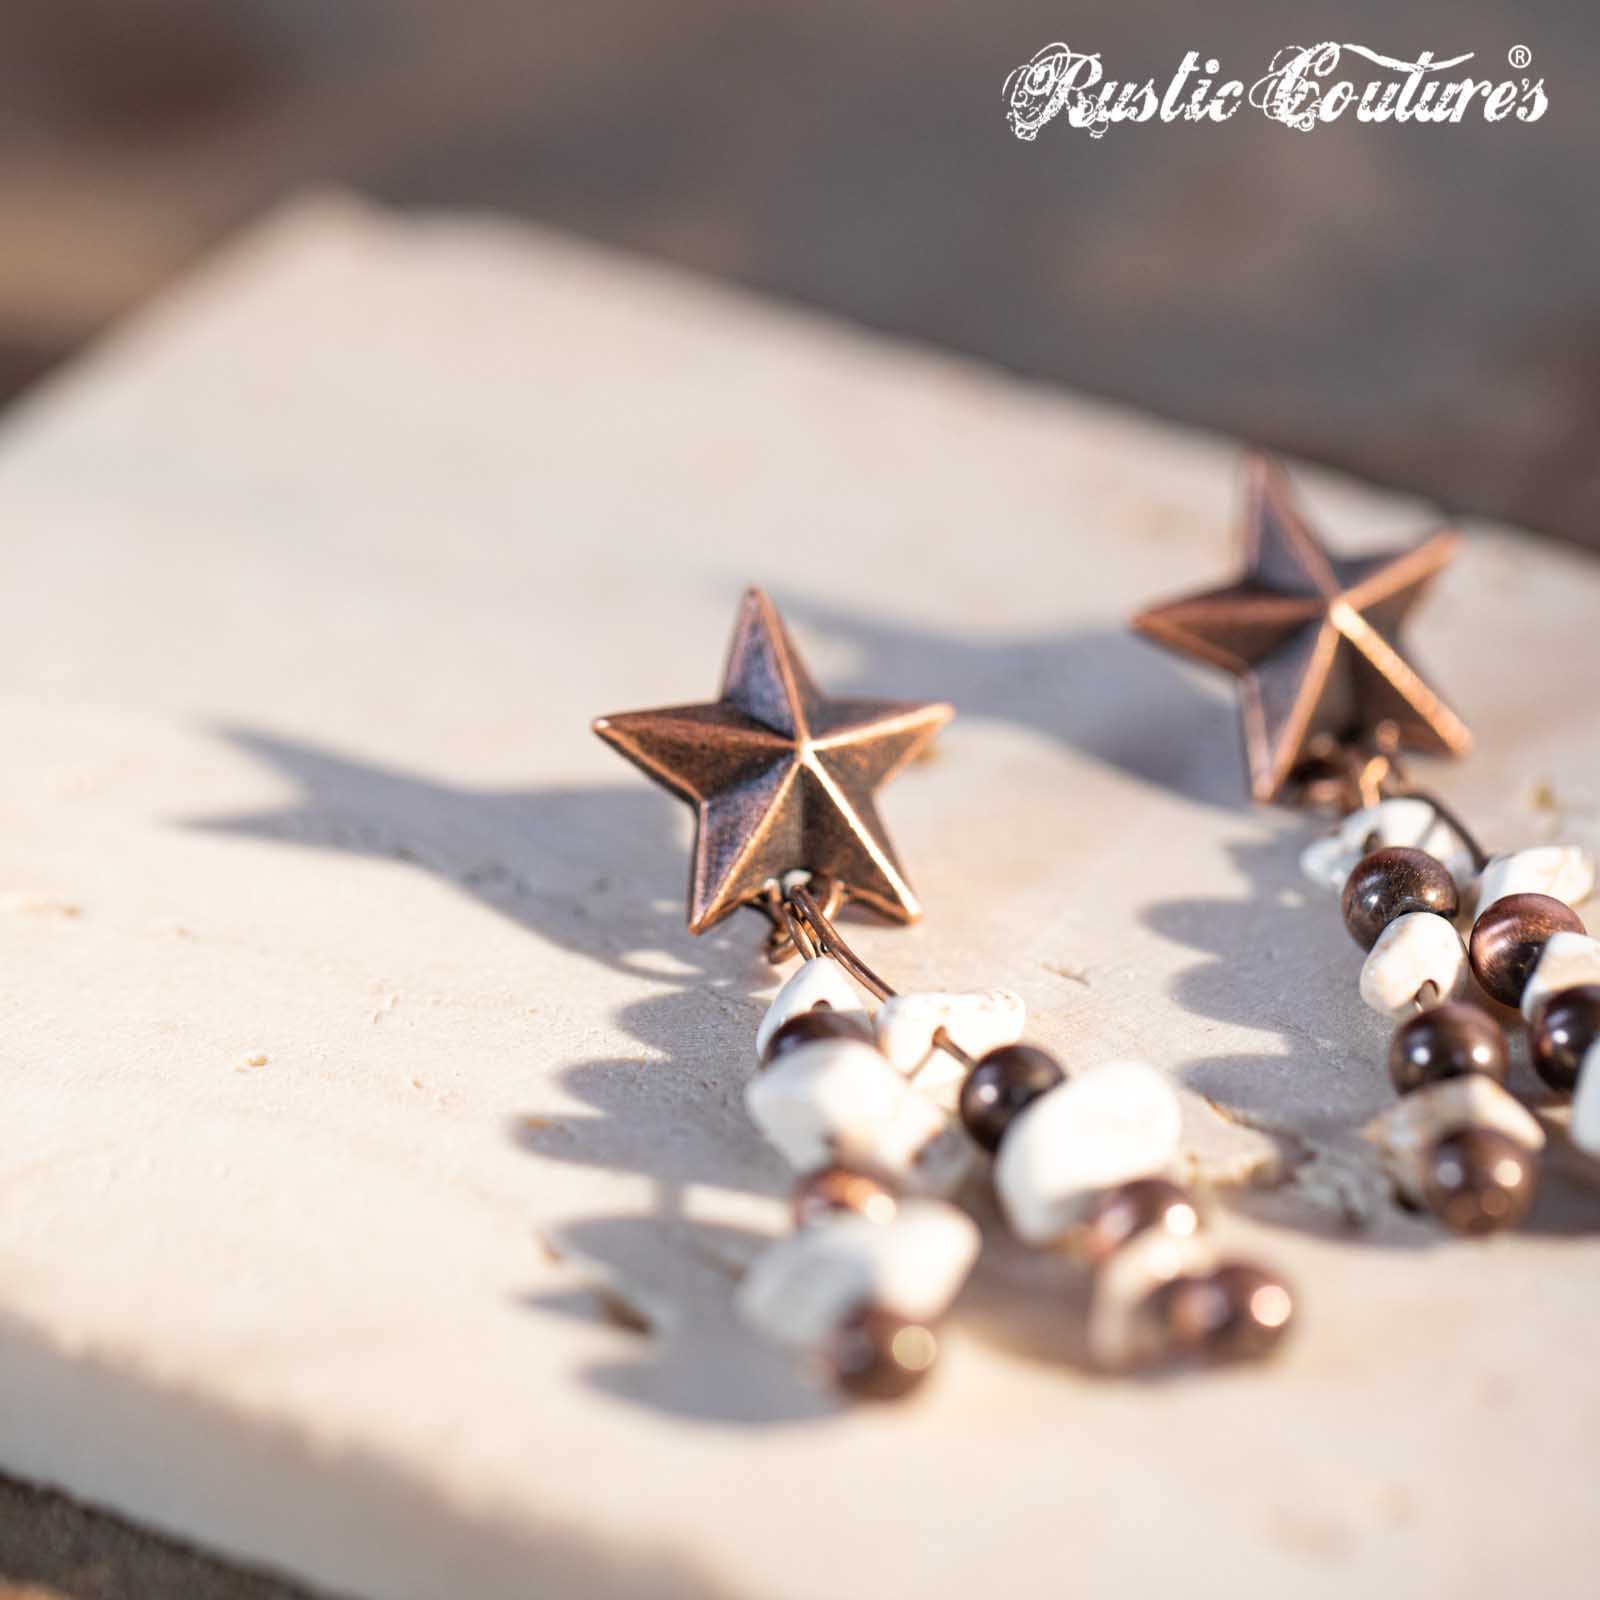 Rustic Couture's Chip Stone with Top Star Stud Earring